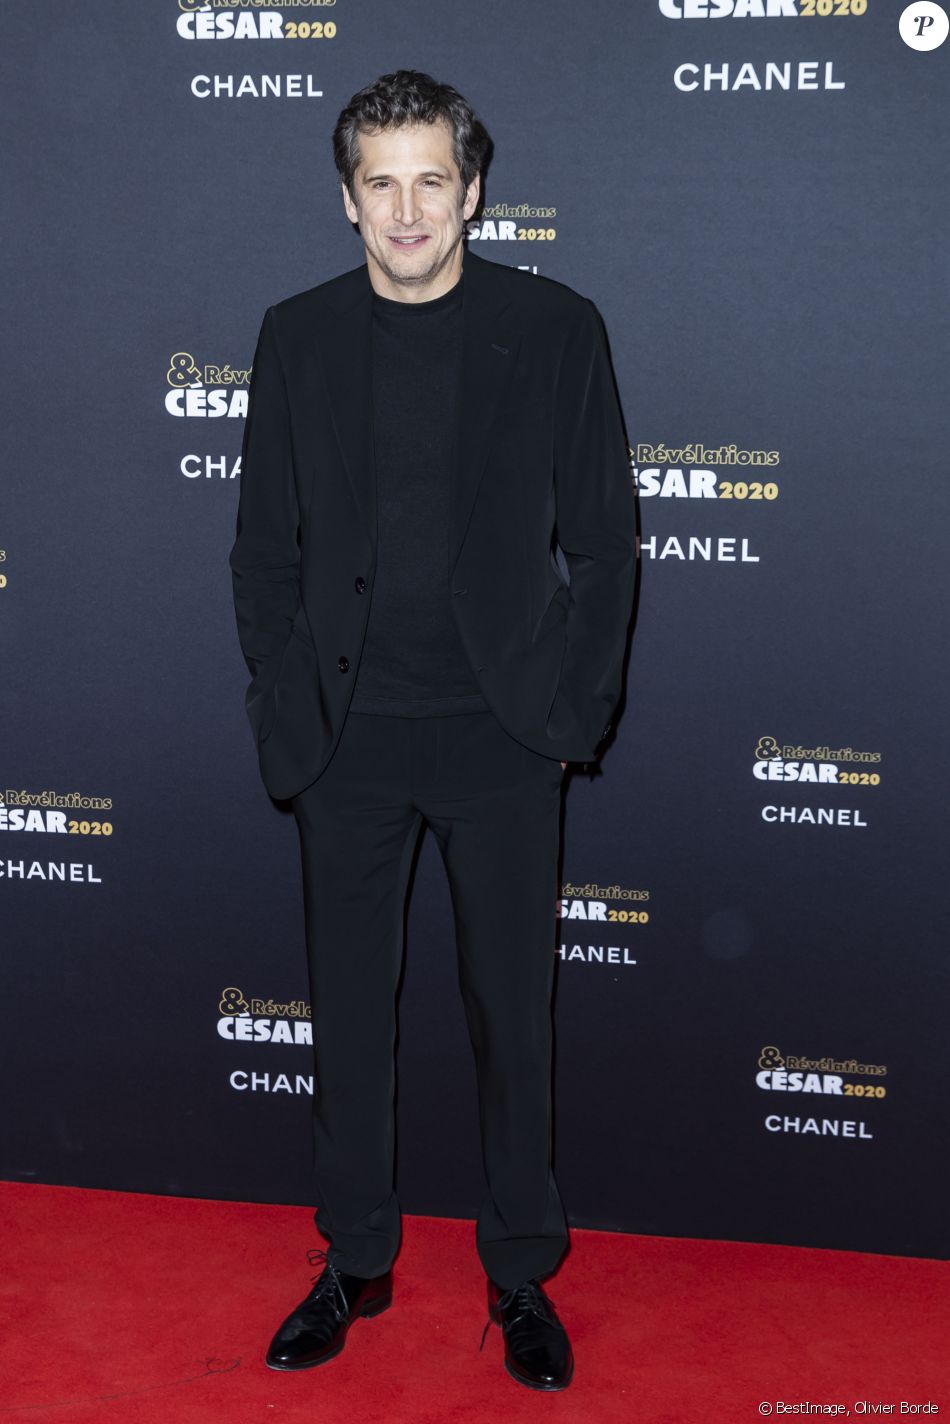 https://static1.purepeople.com/articles/8/39/00/08/@/5608127-guillaume-canet-photocall-du-diner-cha-950x0-2.jpg